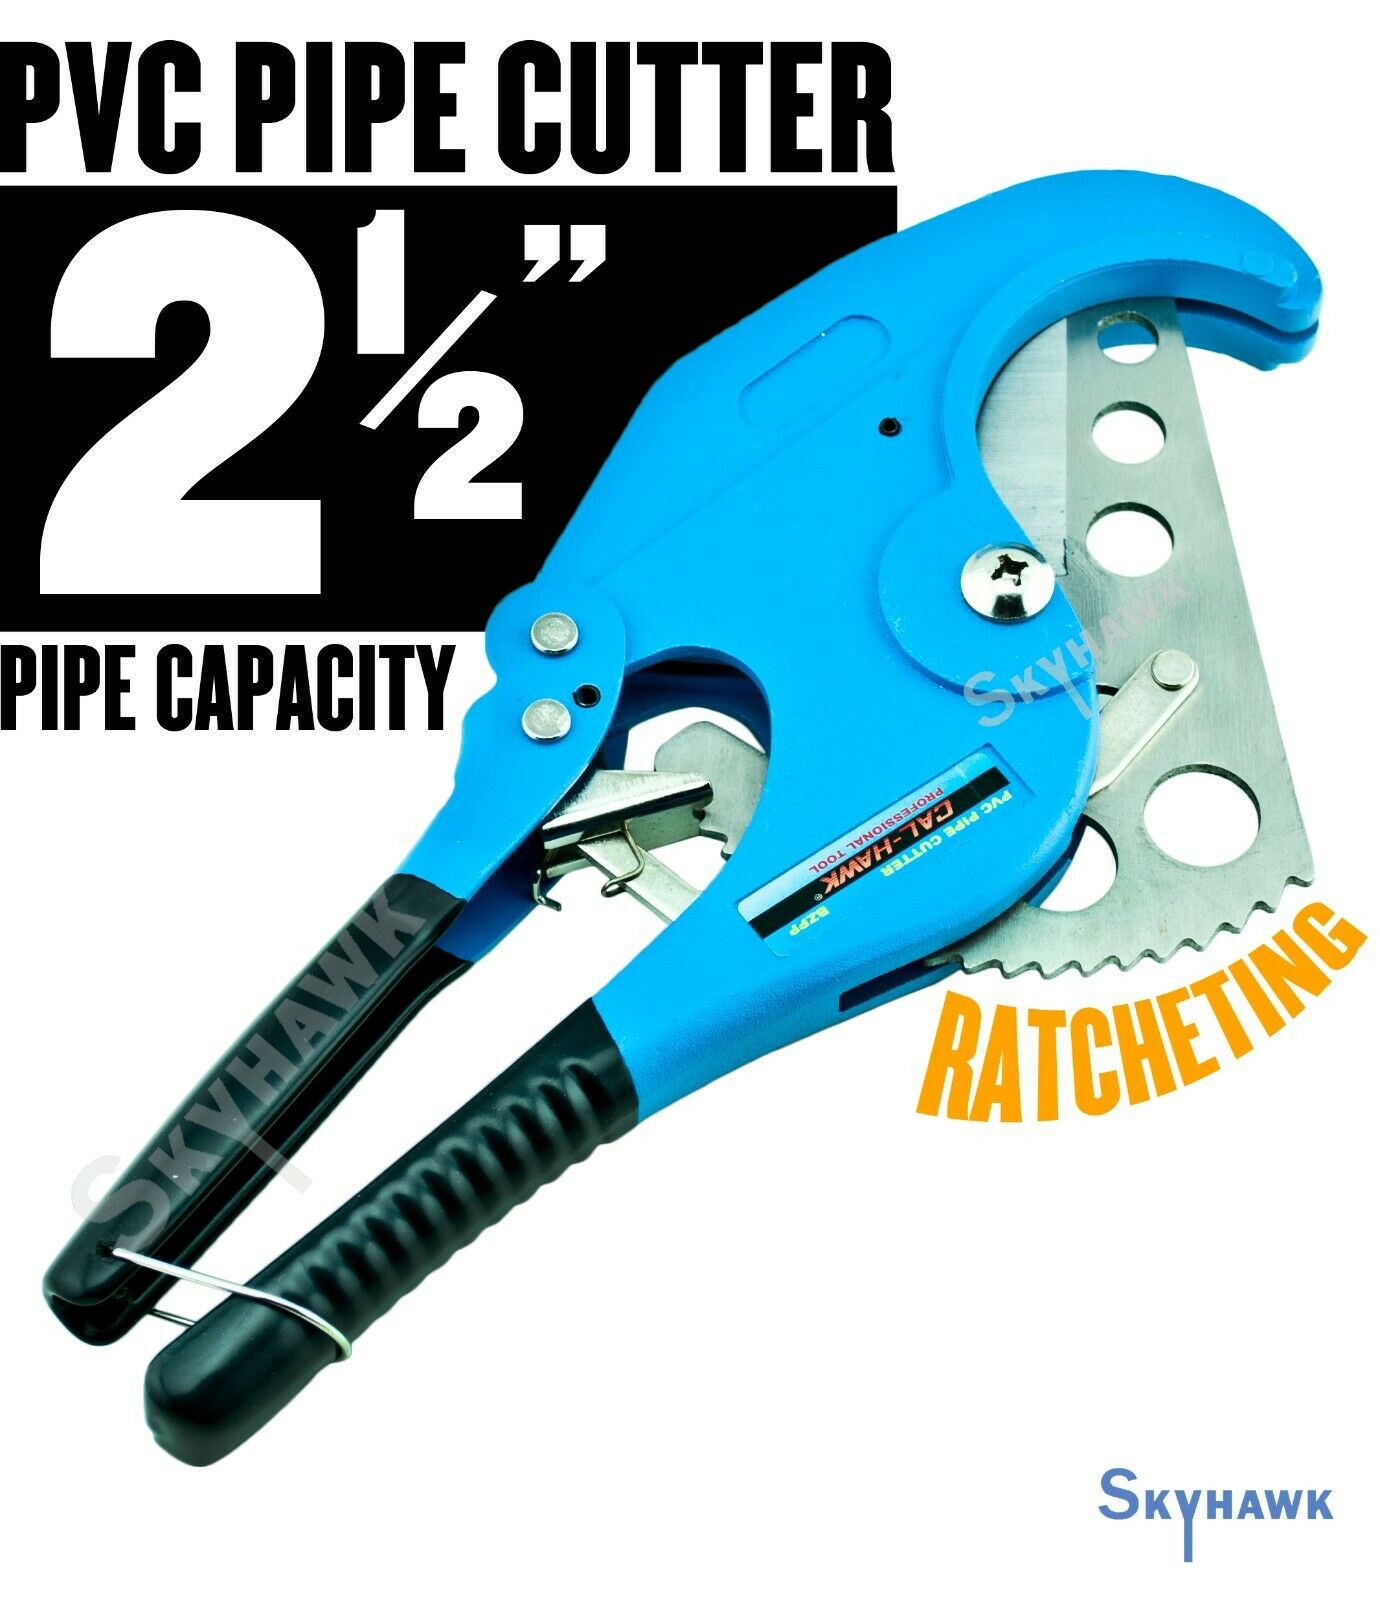 Ratcheting Pvc Pipe Cutter Stainless Steel Blade Cuts Up To 2-1/2" Diameter